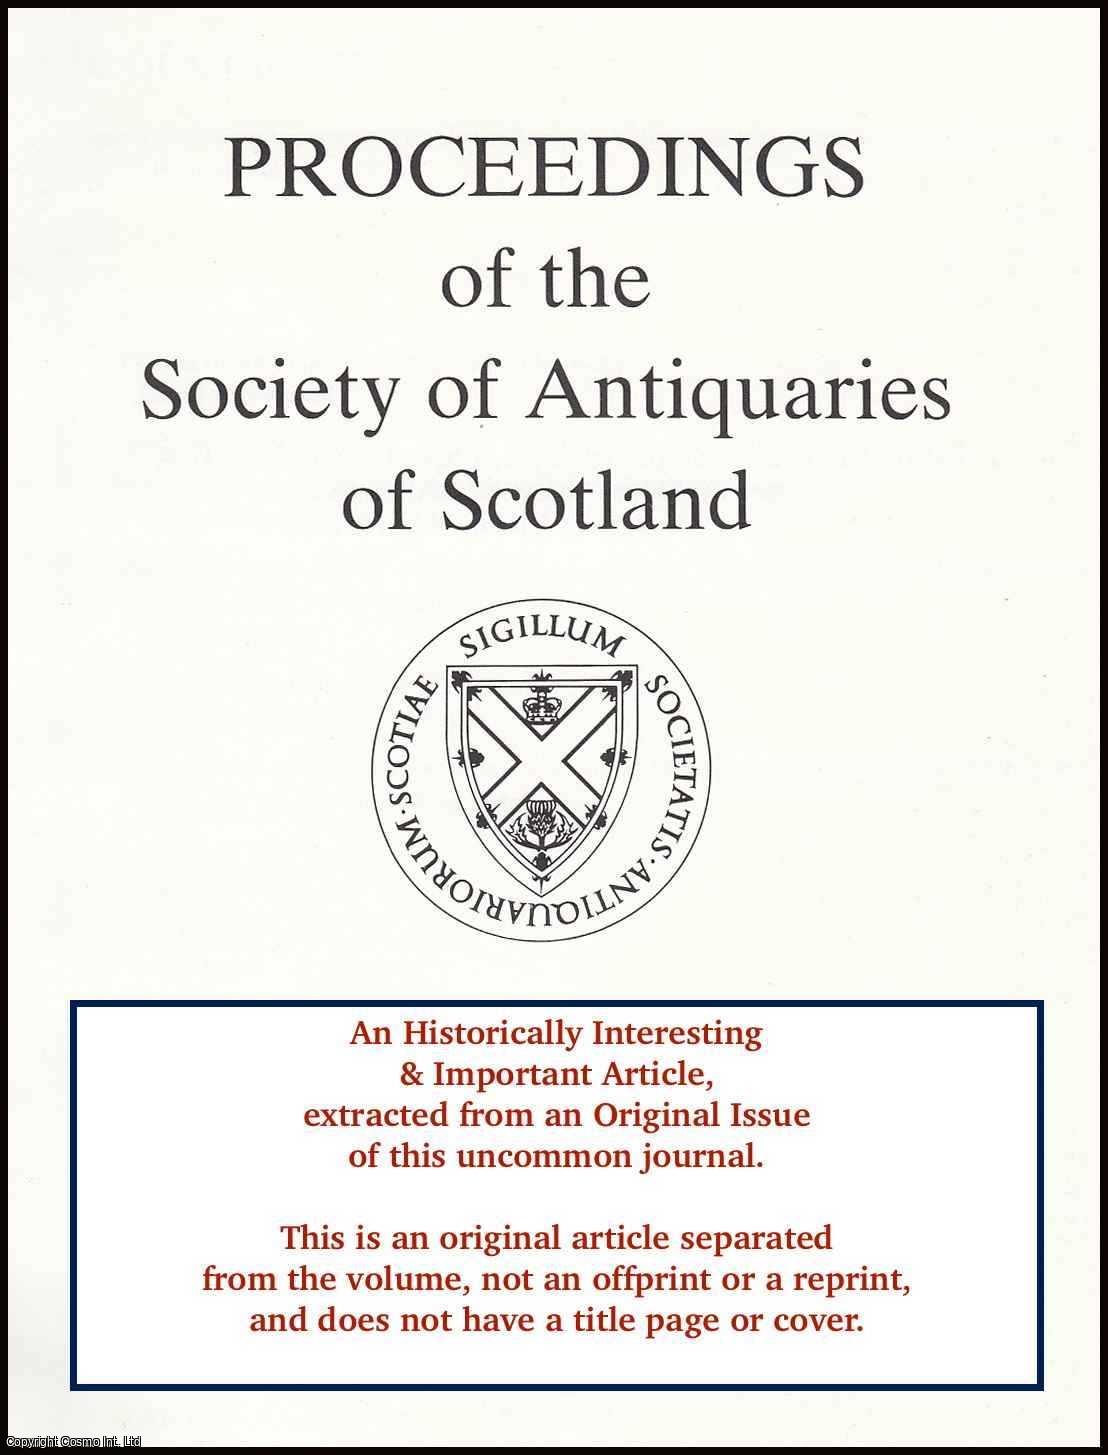 Patrick G. Topping - Later Prehistoric Pottery from Dun Cul Bhuirg, Iona, Argyll. An original article from the Society of Antiquaries of Scotland, 1985.